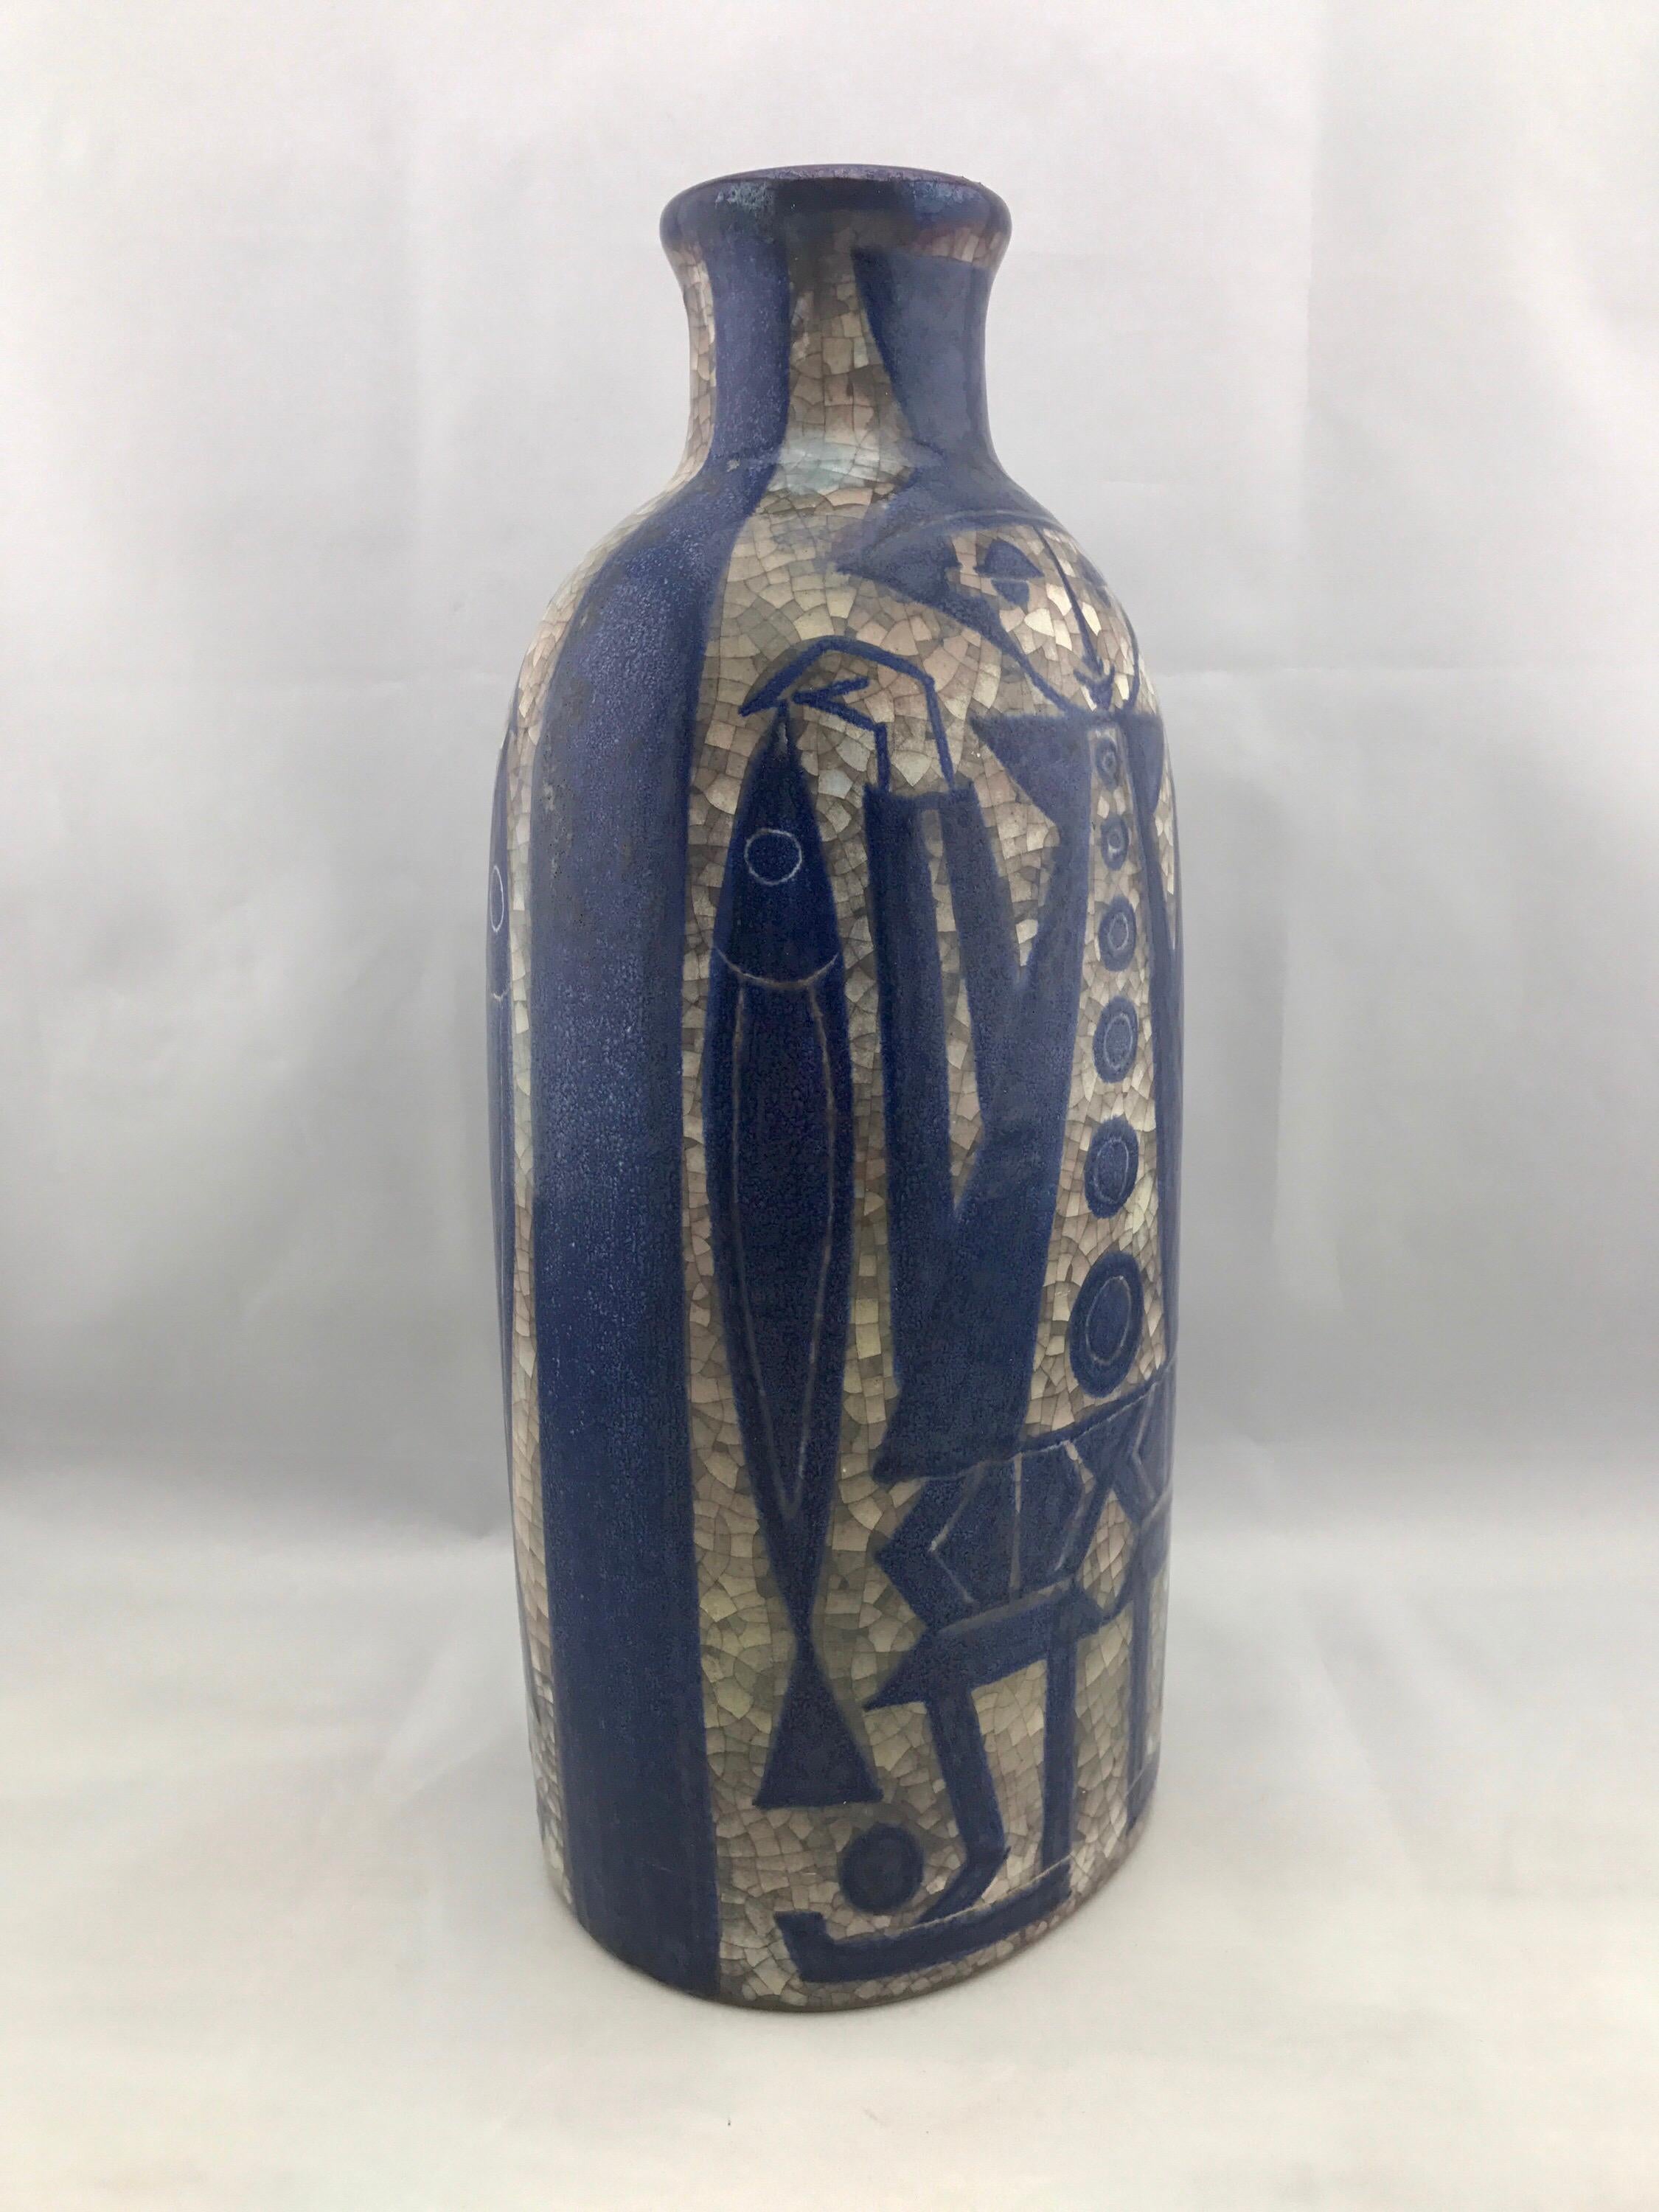 Large Persia vase by Marianne Starck for Michael Andersen & Sons. 
No known issues that would detract from value or aesthetics. Clean and ready for use.